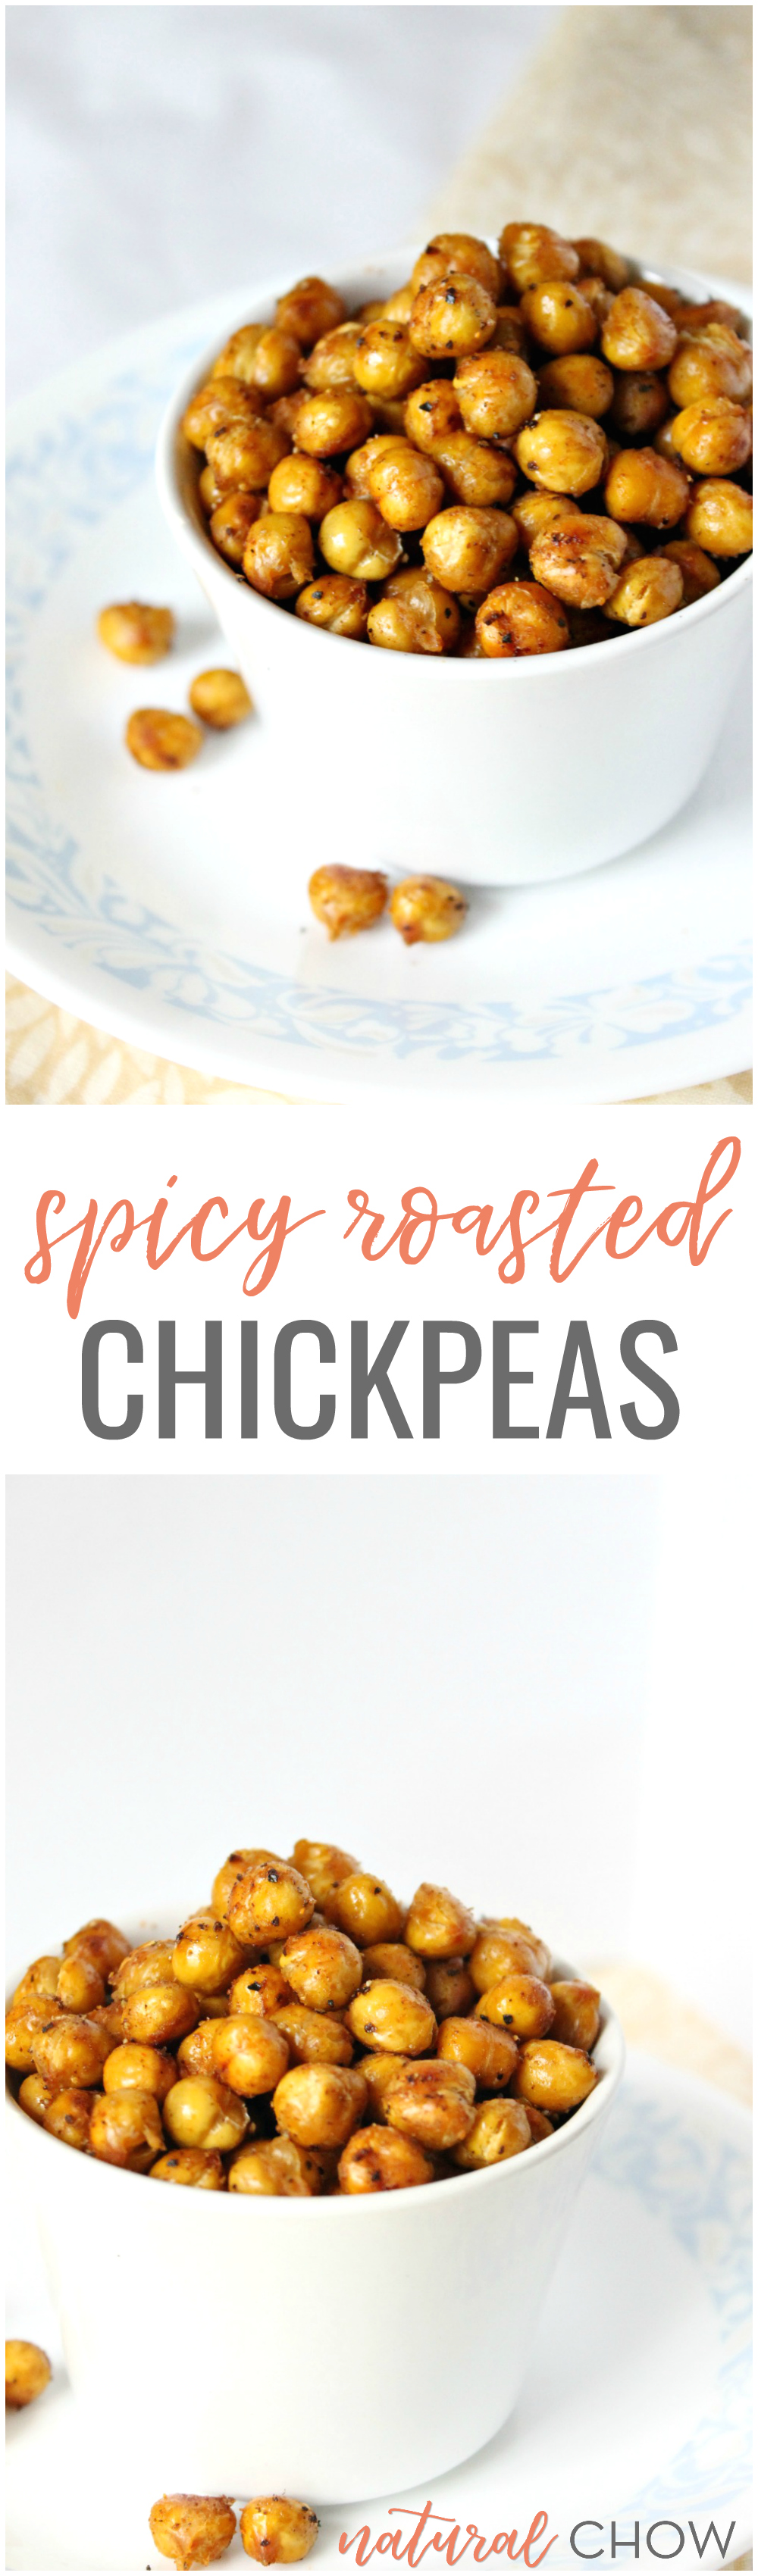 These spicy roasted chickpeas are a delicious and healthy snack. Made with just a few simple ingredients, this incredibly easy snack is packed with flavor!